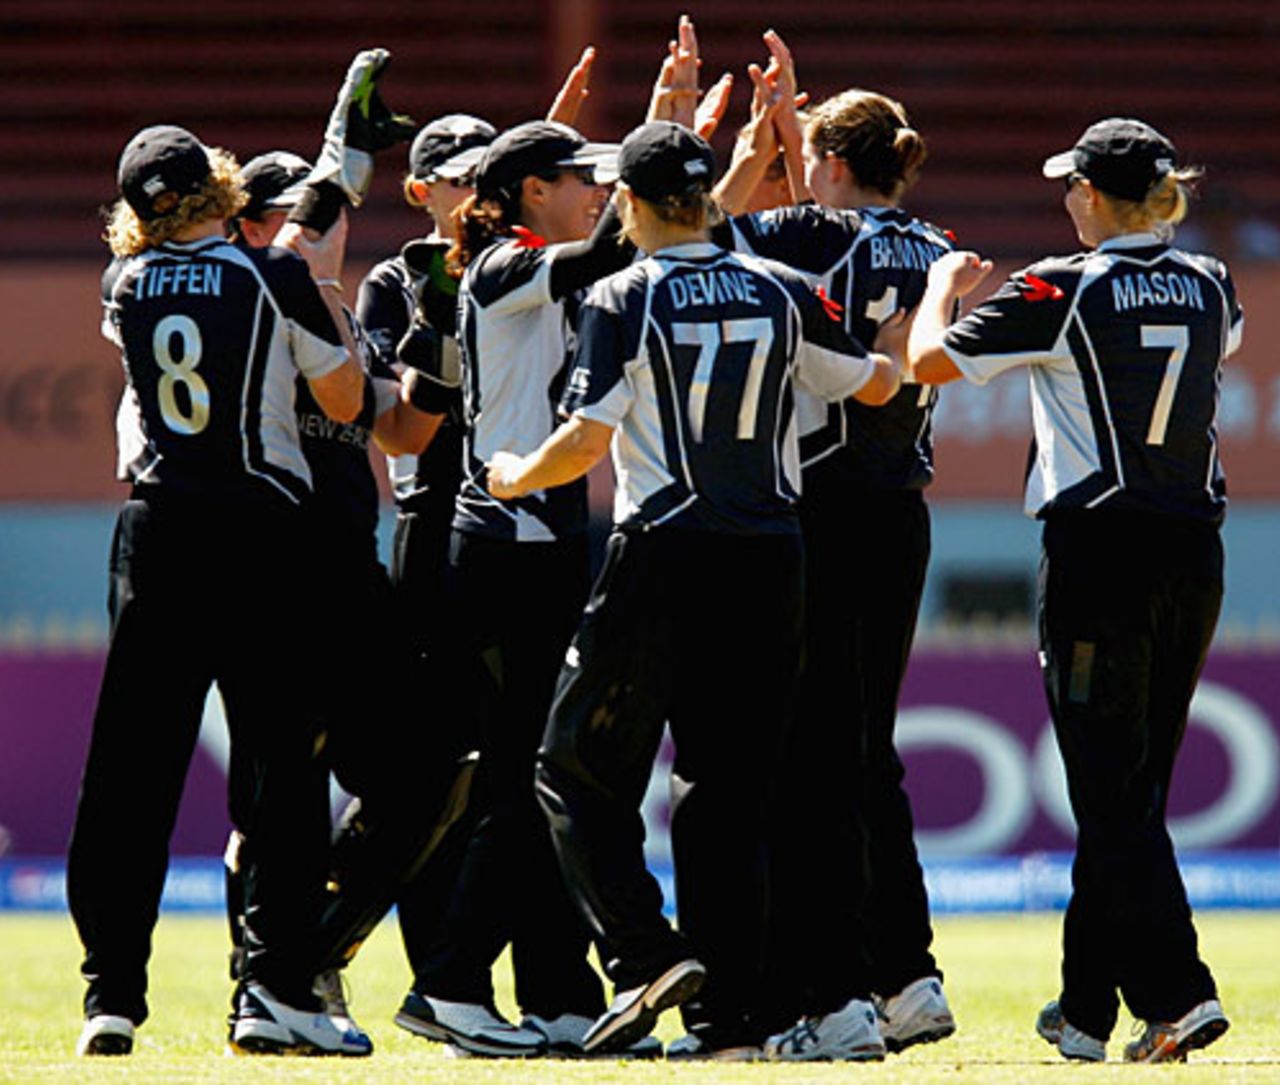 Nicola Browne is congratulated for dismissing Mithali Raj, India v New Zealand, Super Six, women's World Cup, Sydney, March 17, 2009